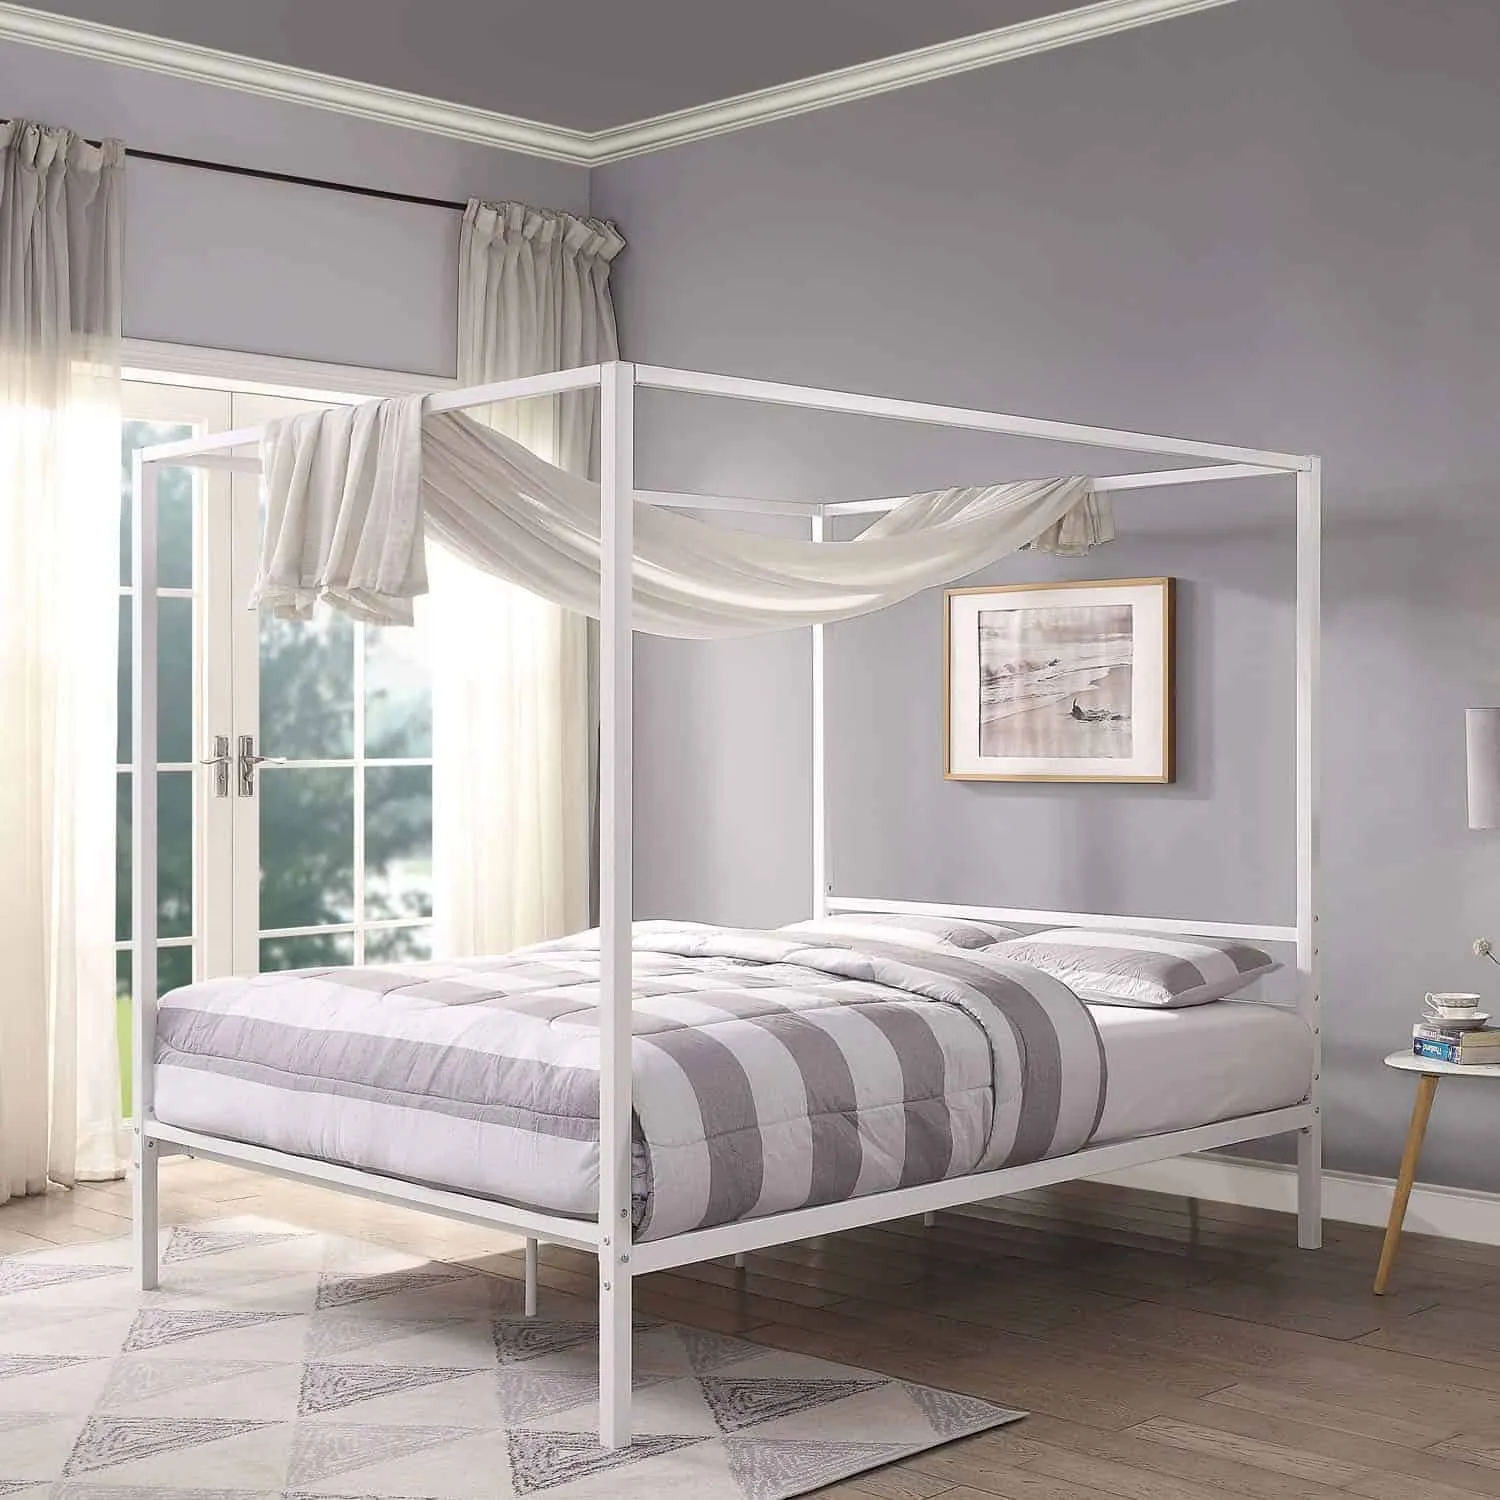 white four poster couble size bed design, pillows, bedsheet, large window with white curtains